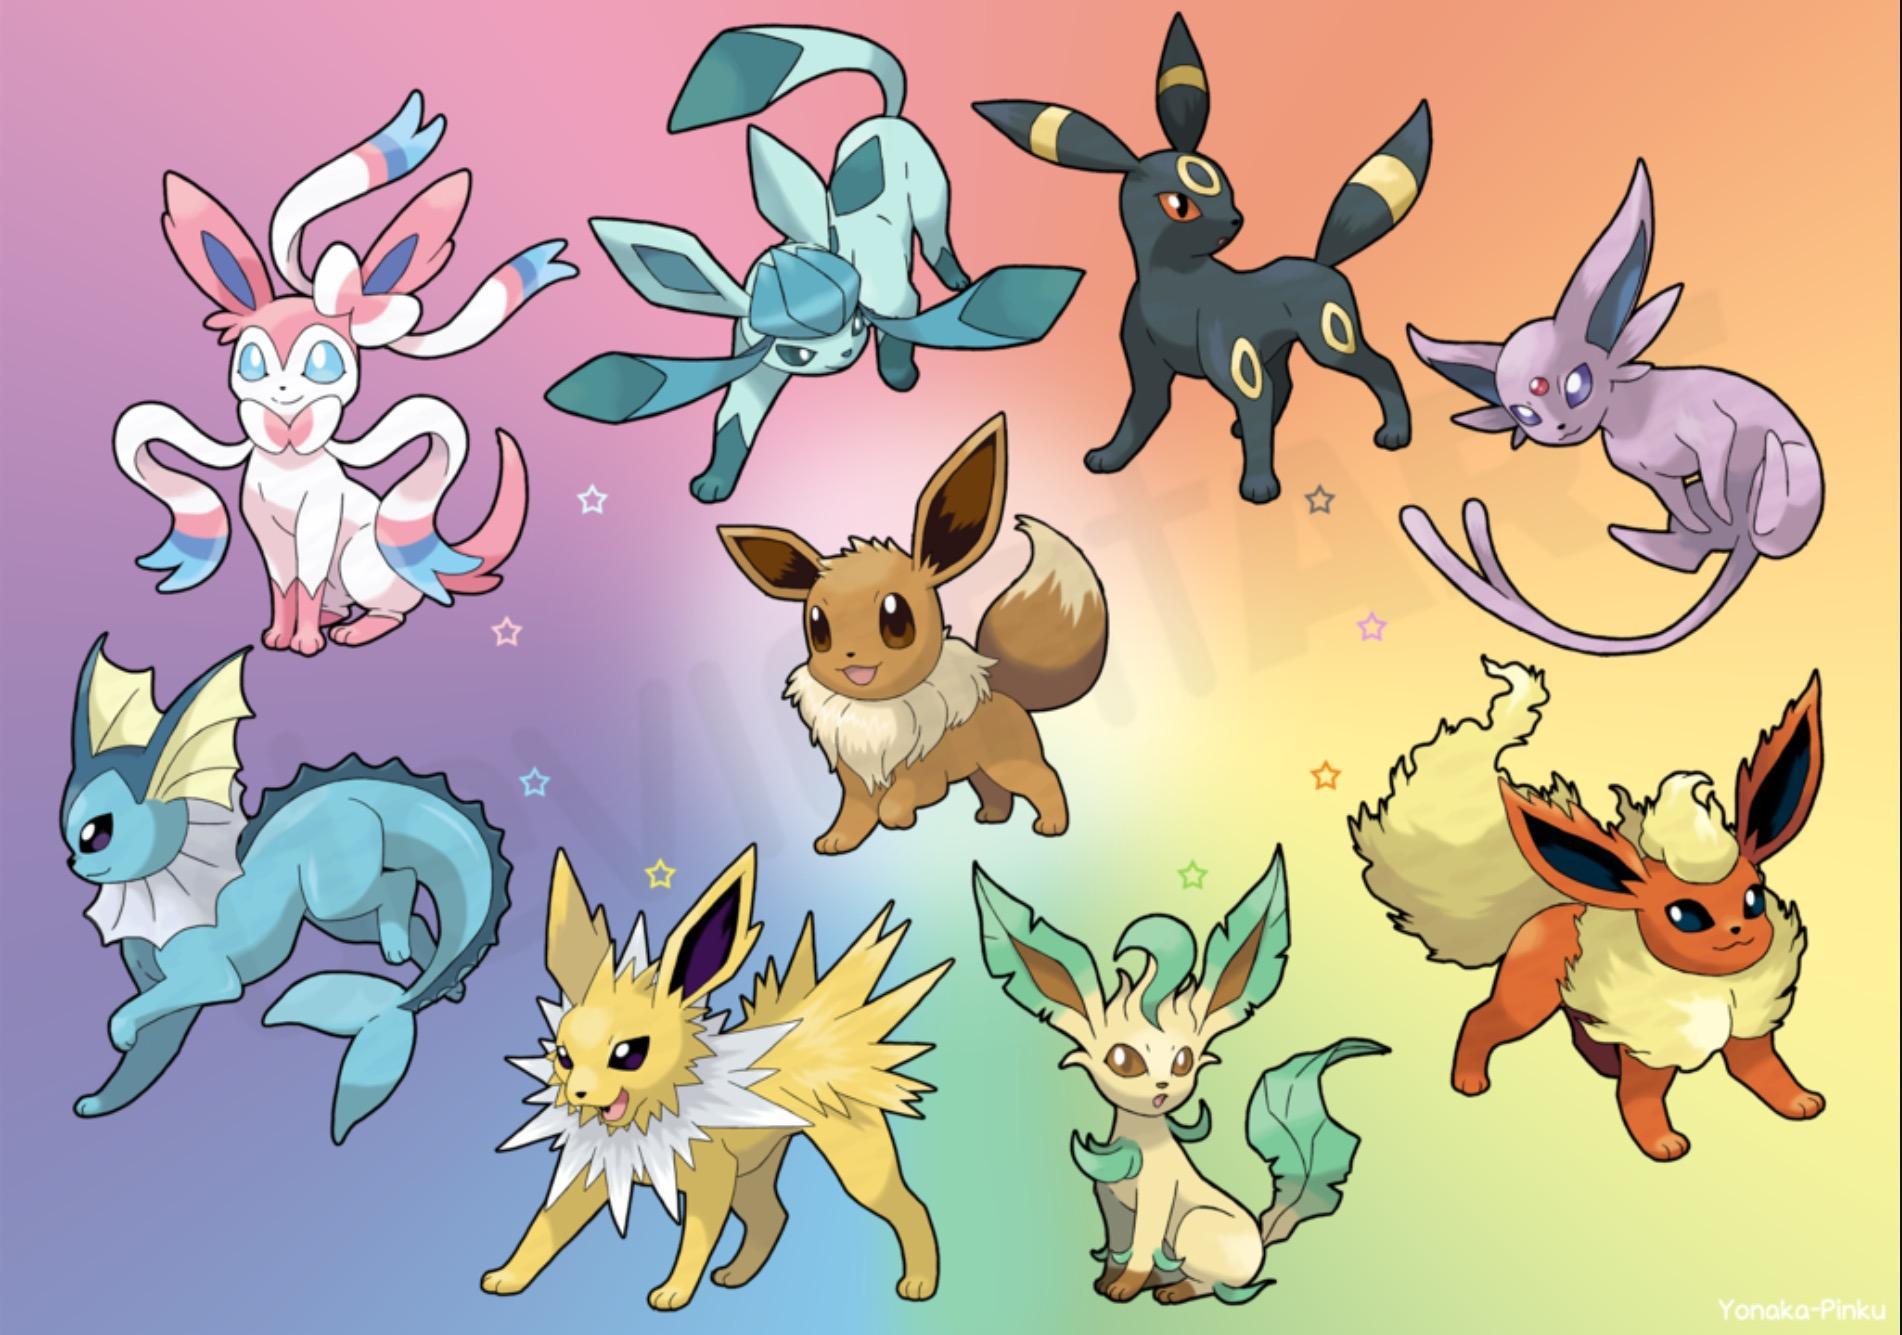 What, do, the, eeveelutions, think, of, you, Personality Quiz.